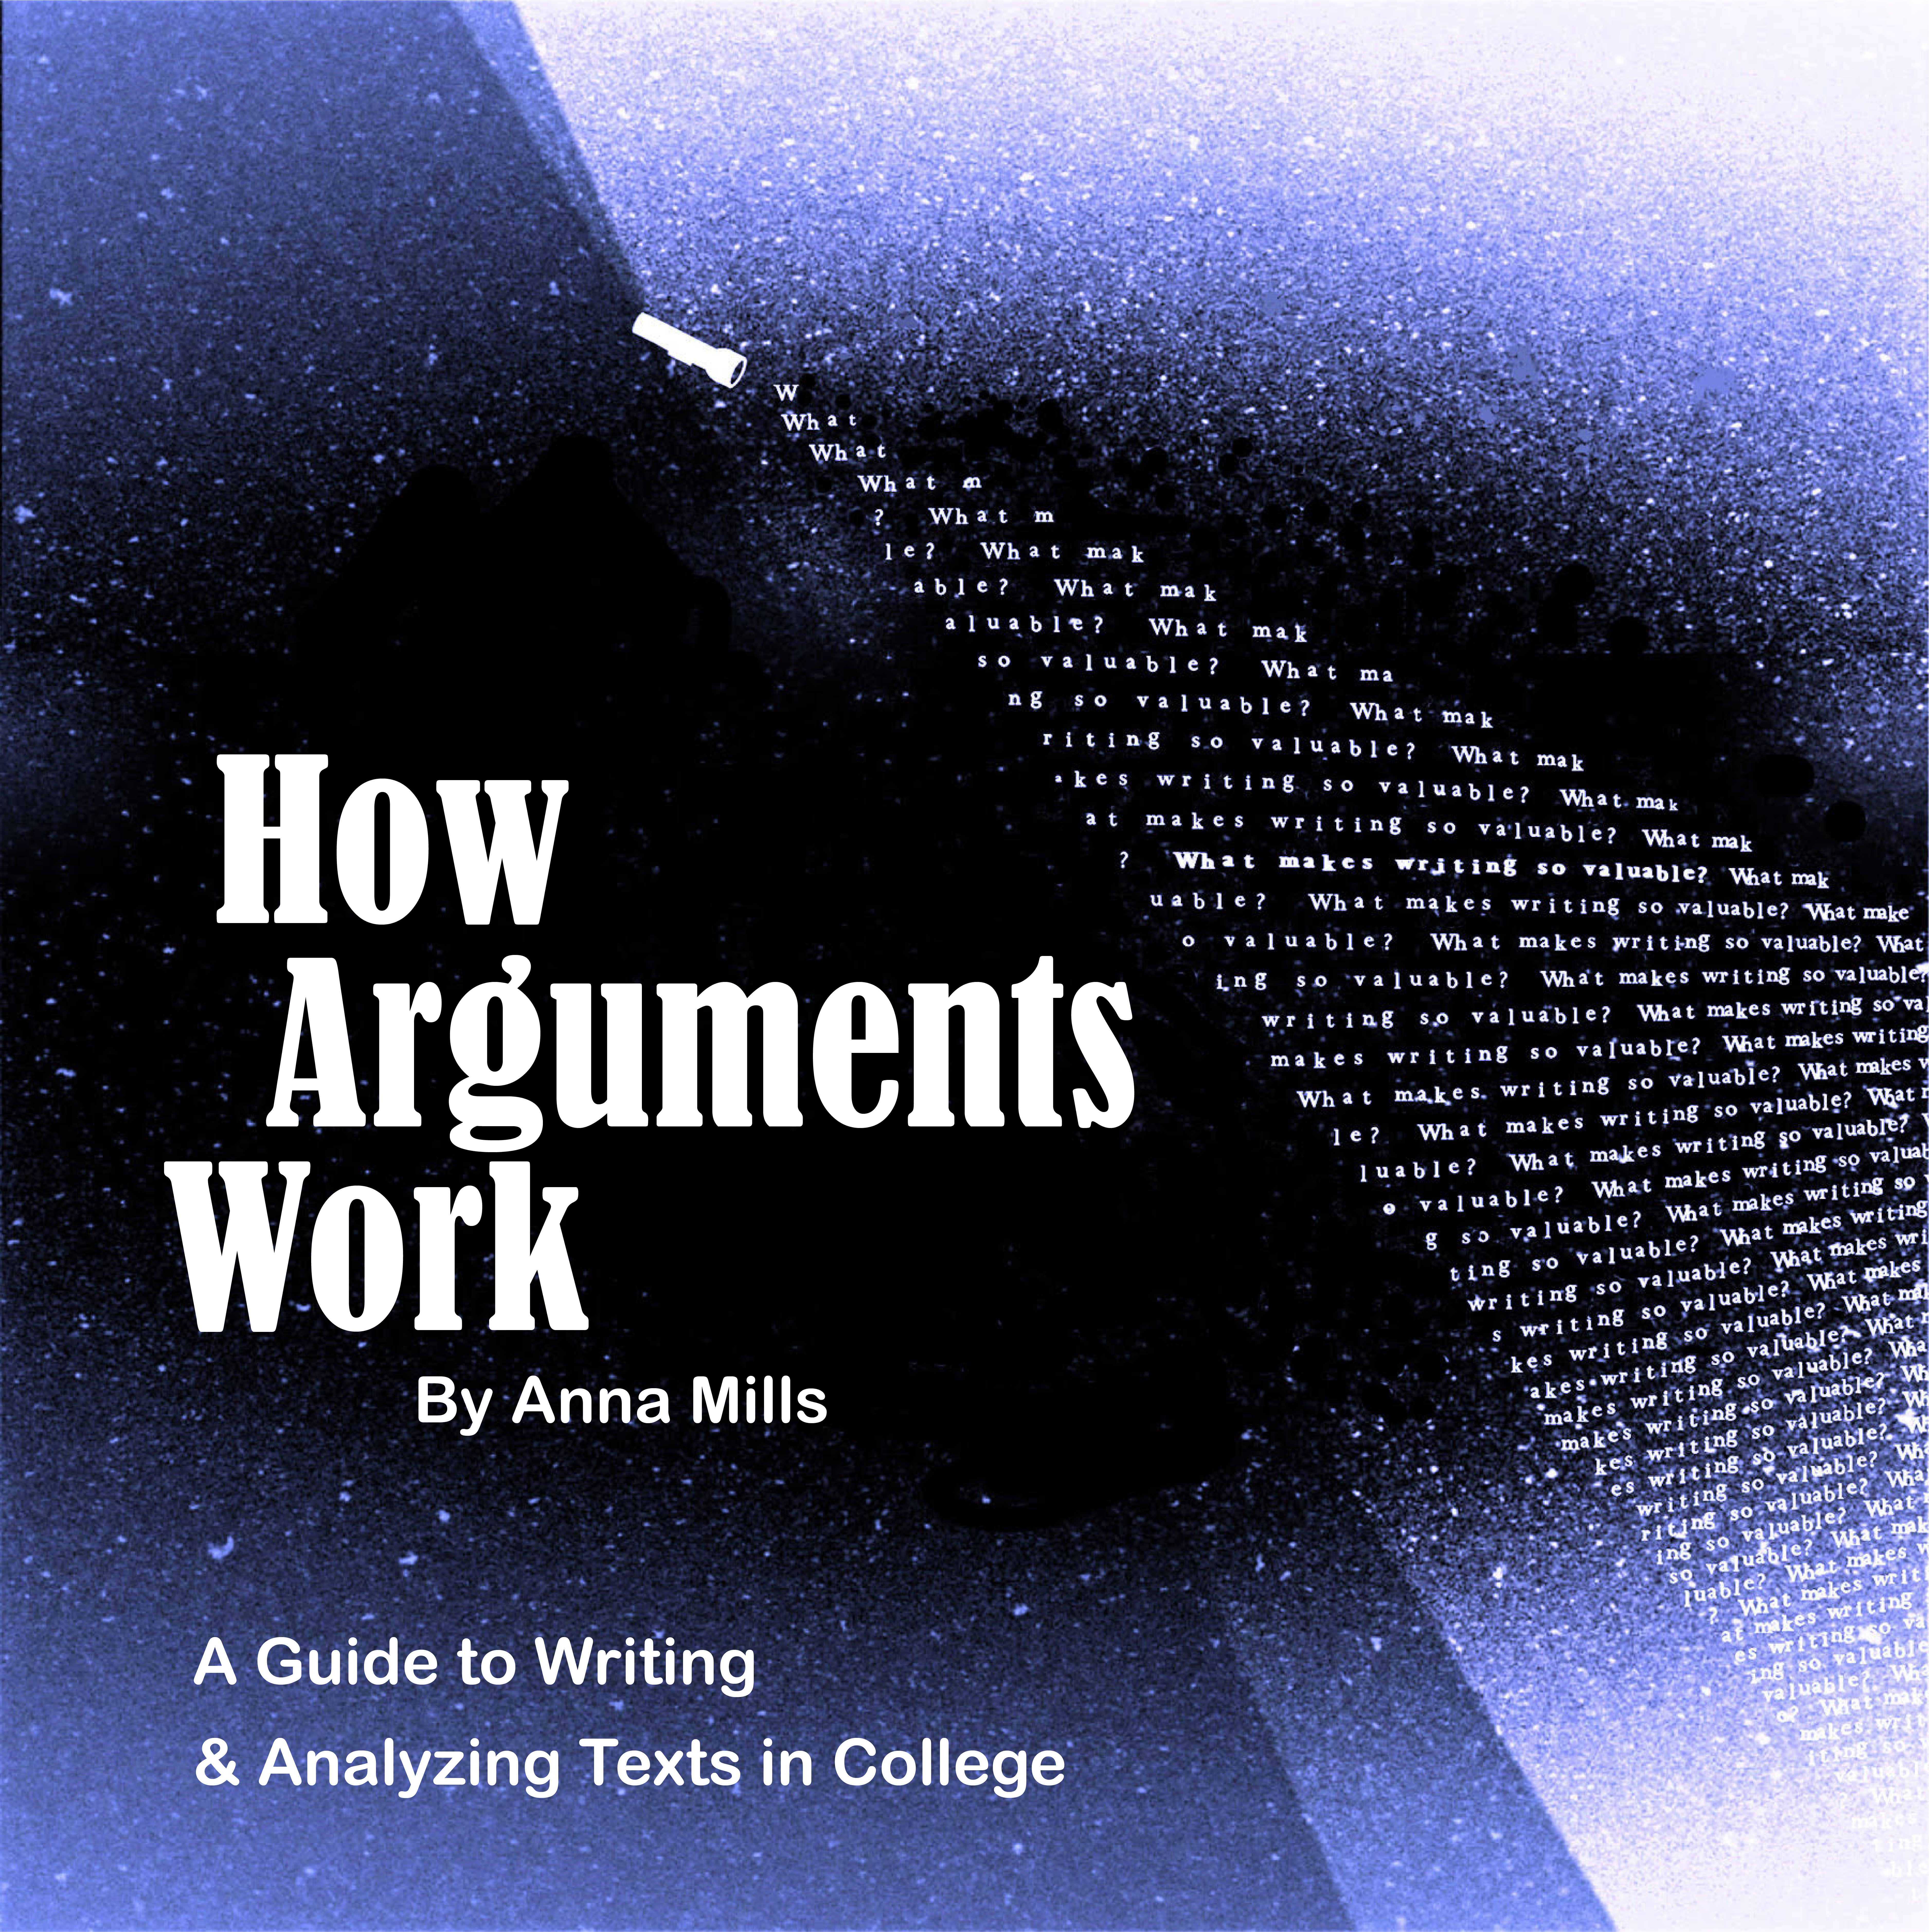 How Arguments Work: A Guide to Writing and Analyzing Texts in College by Anna Mills